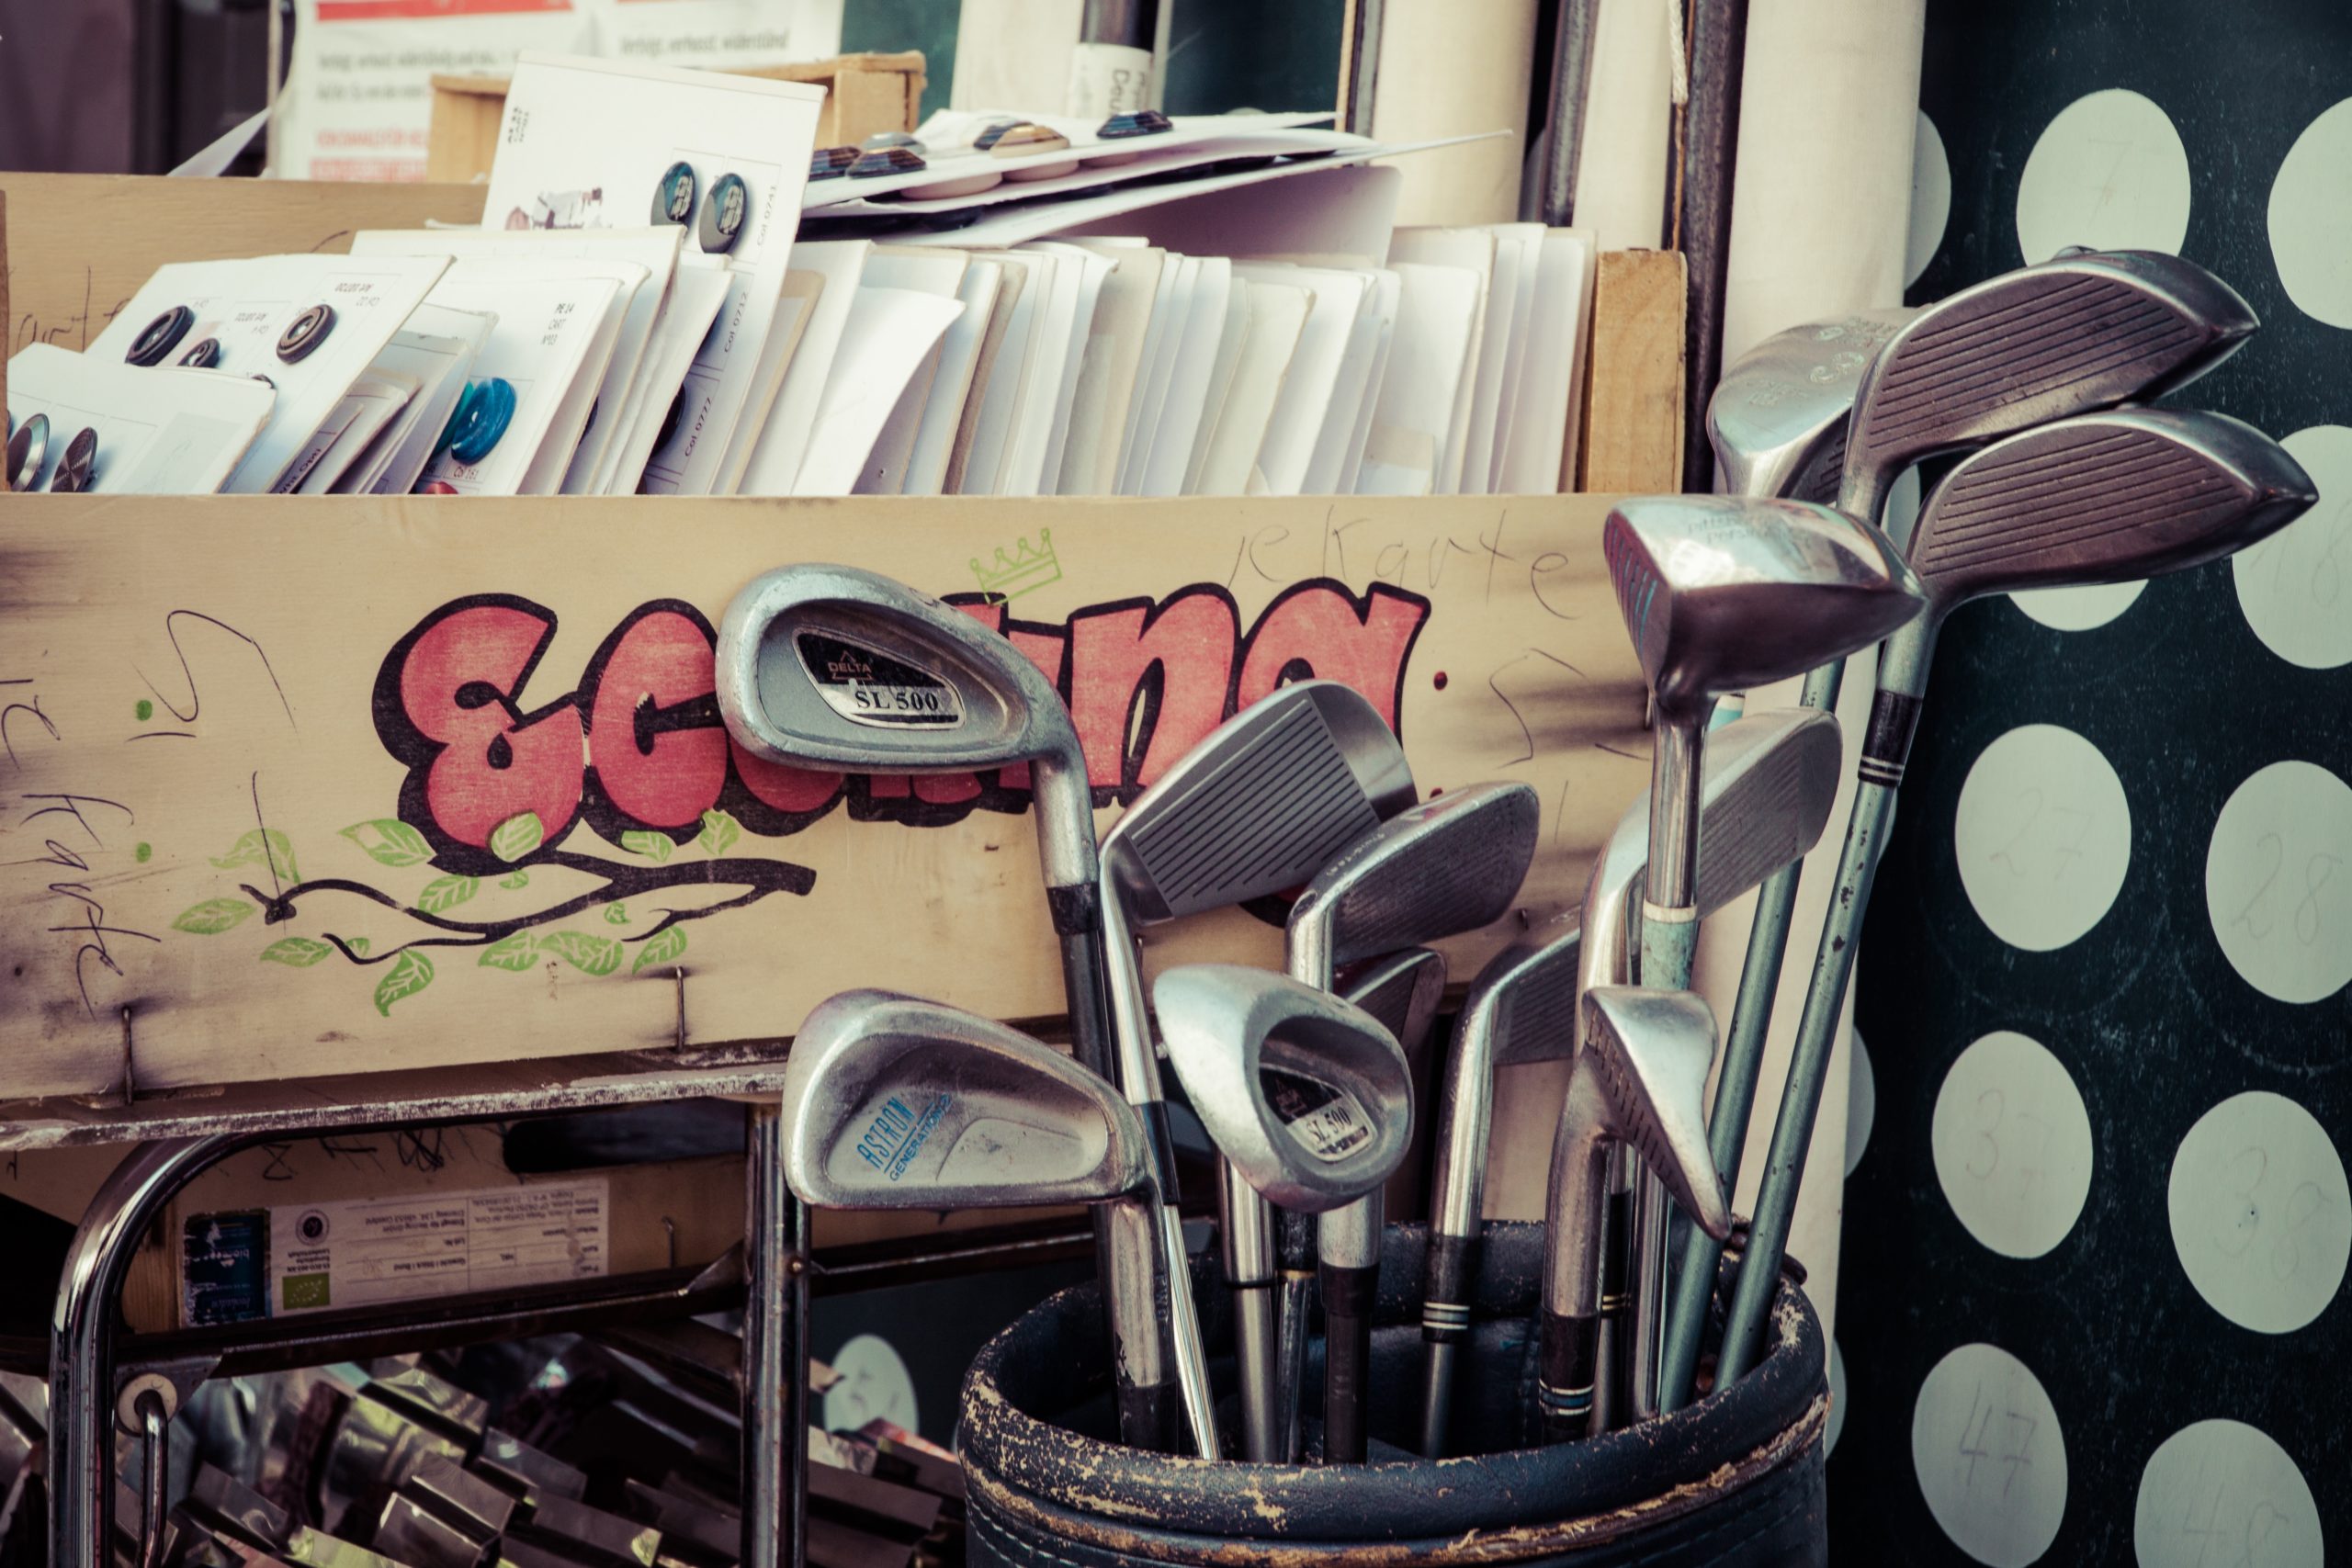 How to regrip golf clubs at home